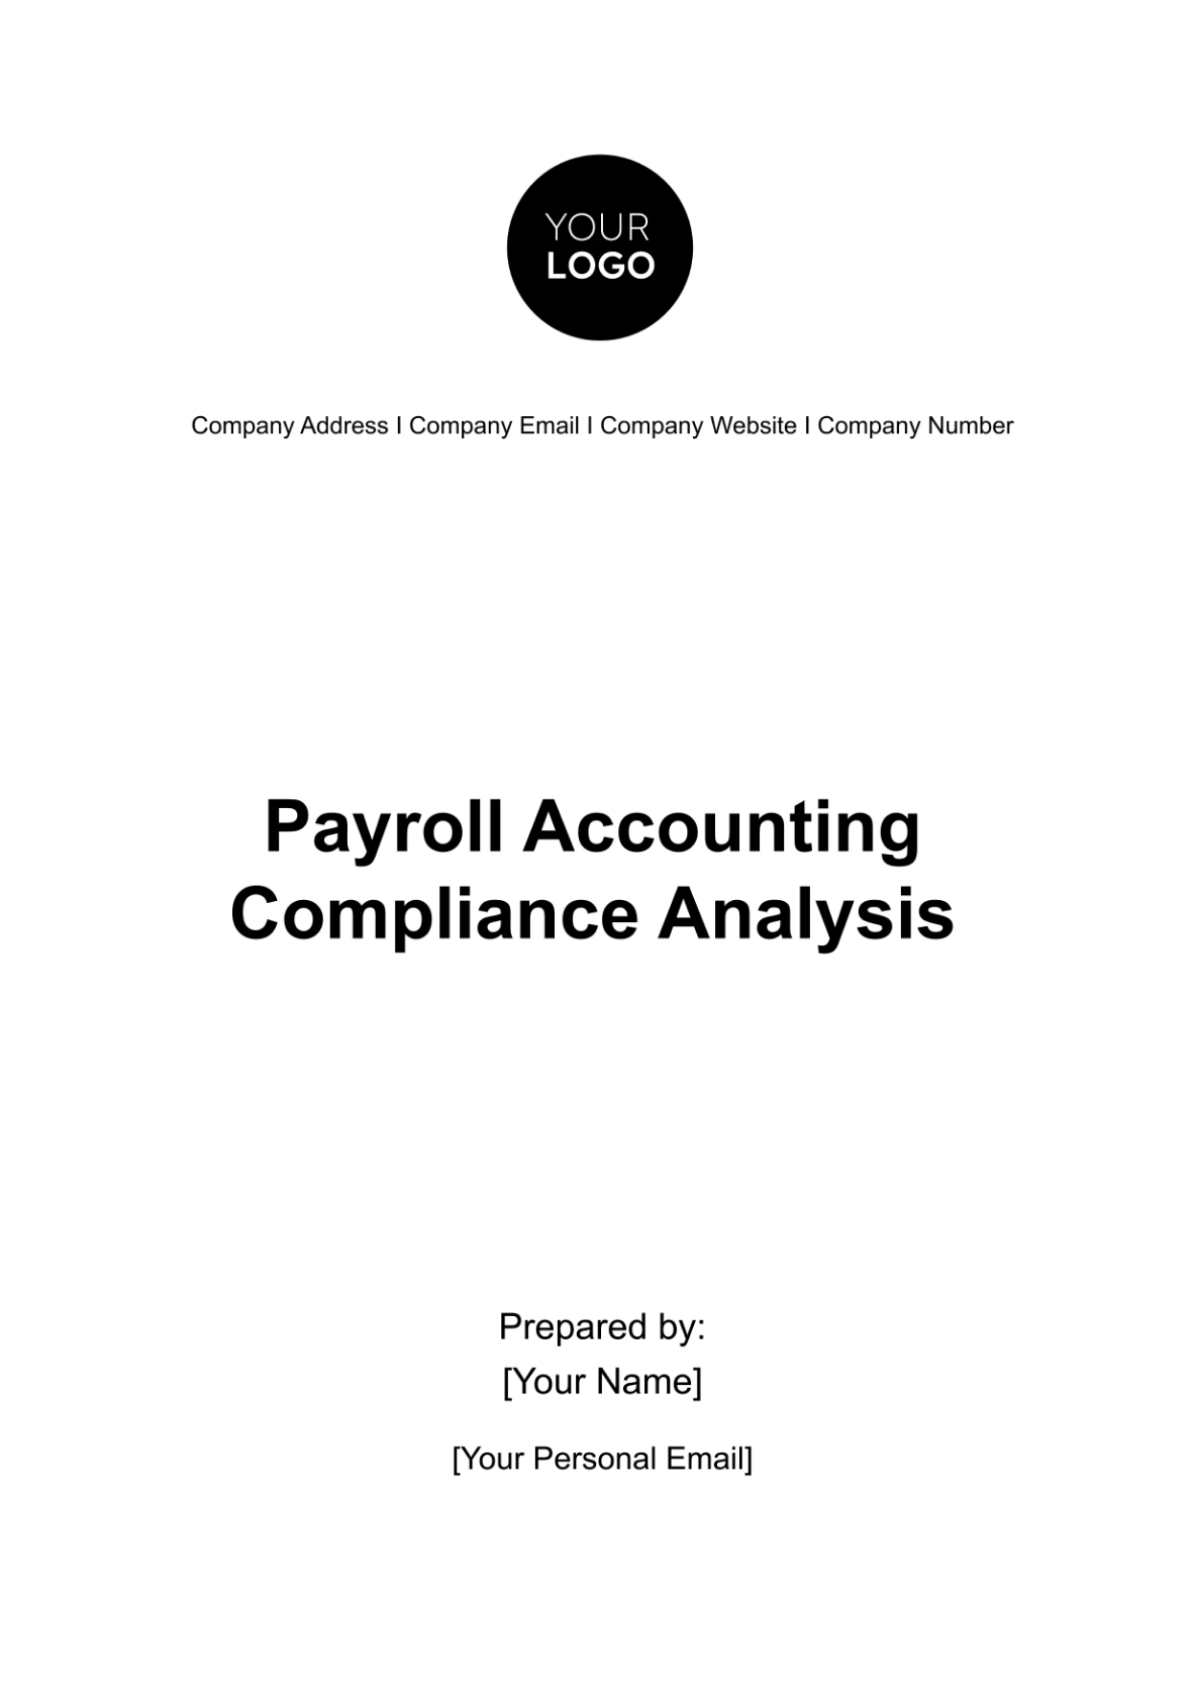 Free Payroll Accounting Compliance Analysis Template